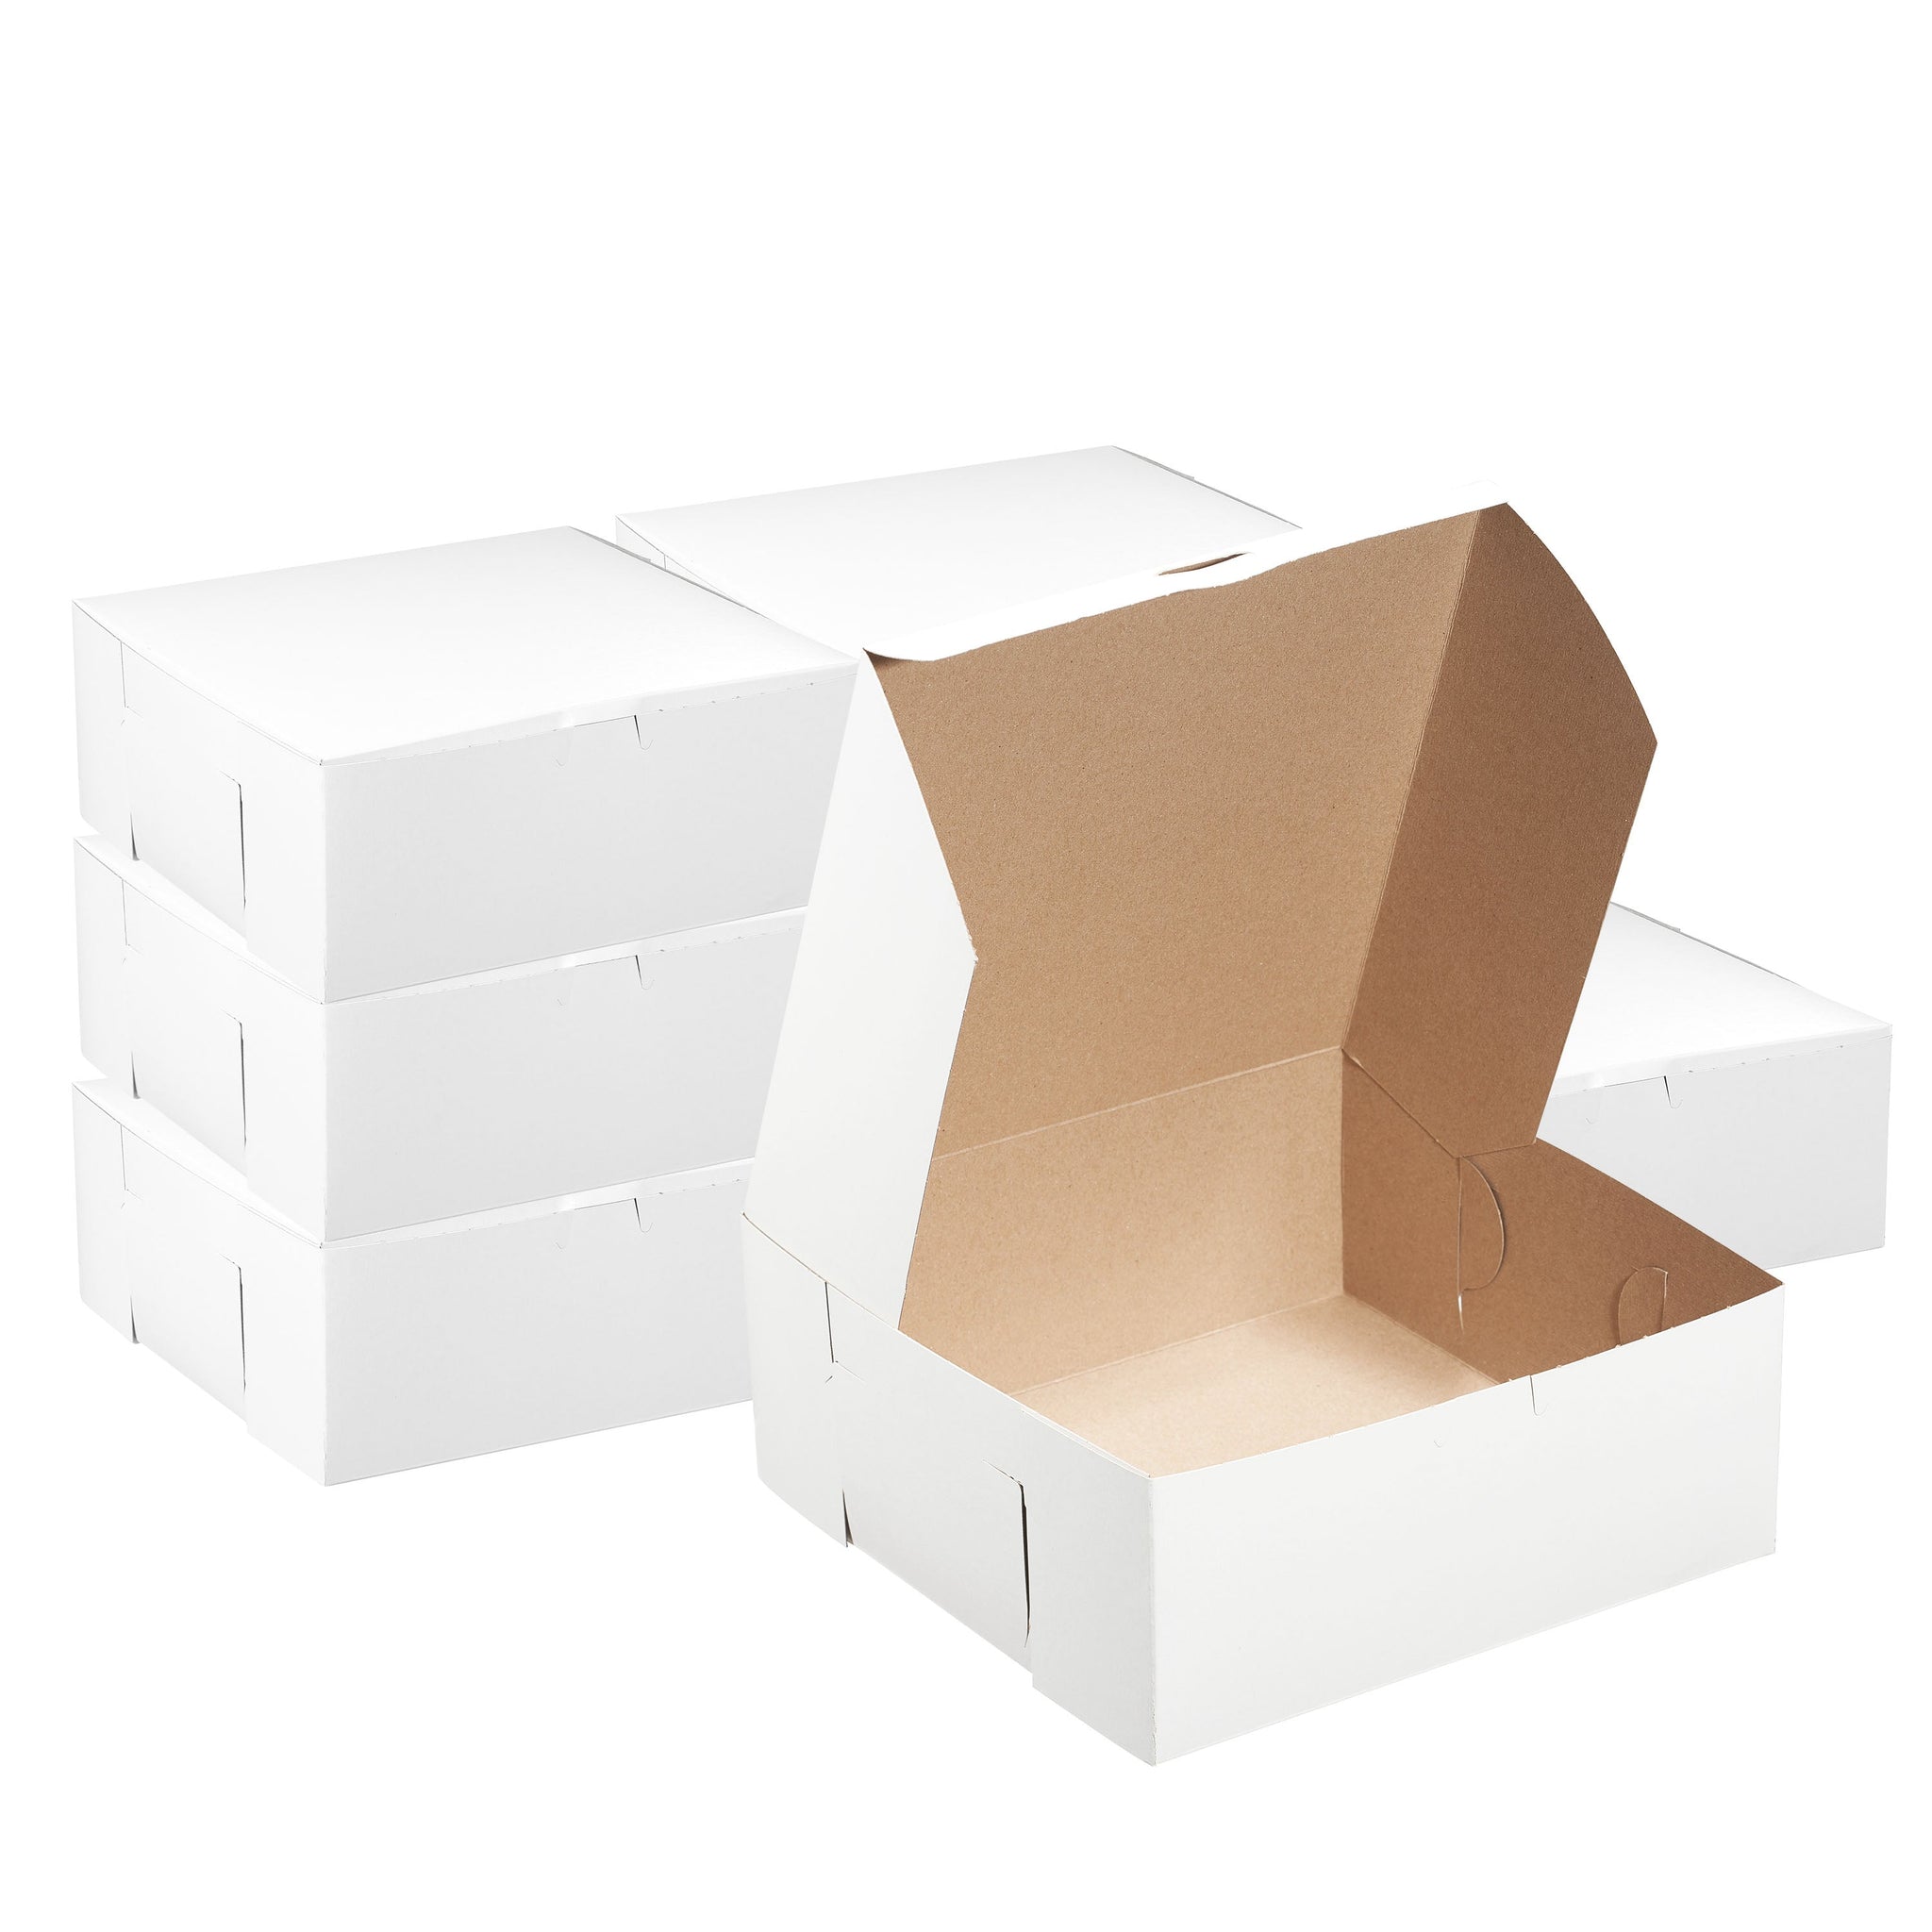 White Kraft Paperboard for Home or Retail  White Bakery Pastry Boxes  Restaurant Food Trucks Caterers take out sustainable  Recyclable for Pastries  Pies  Paper Cardboard  Gift Box  Ecofriendly  Cookies  Catering Restaurant Cafe Buffet Event Party  Cakes  Baby Shower  affordable bulk economical commercial wholesale  10